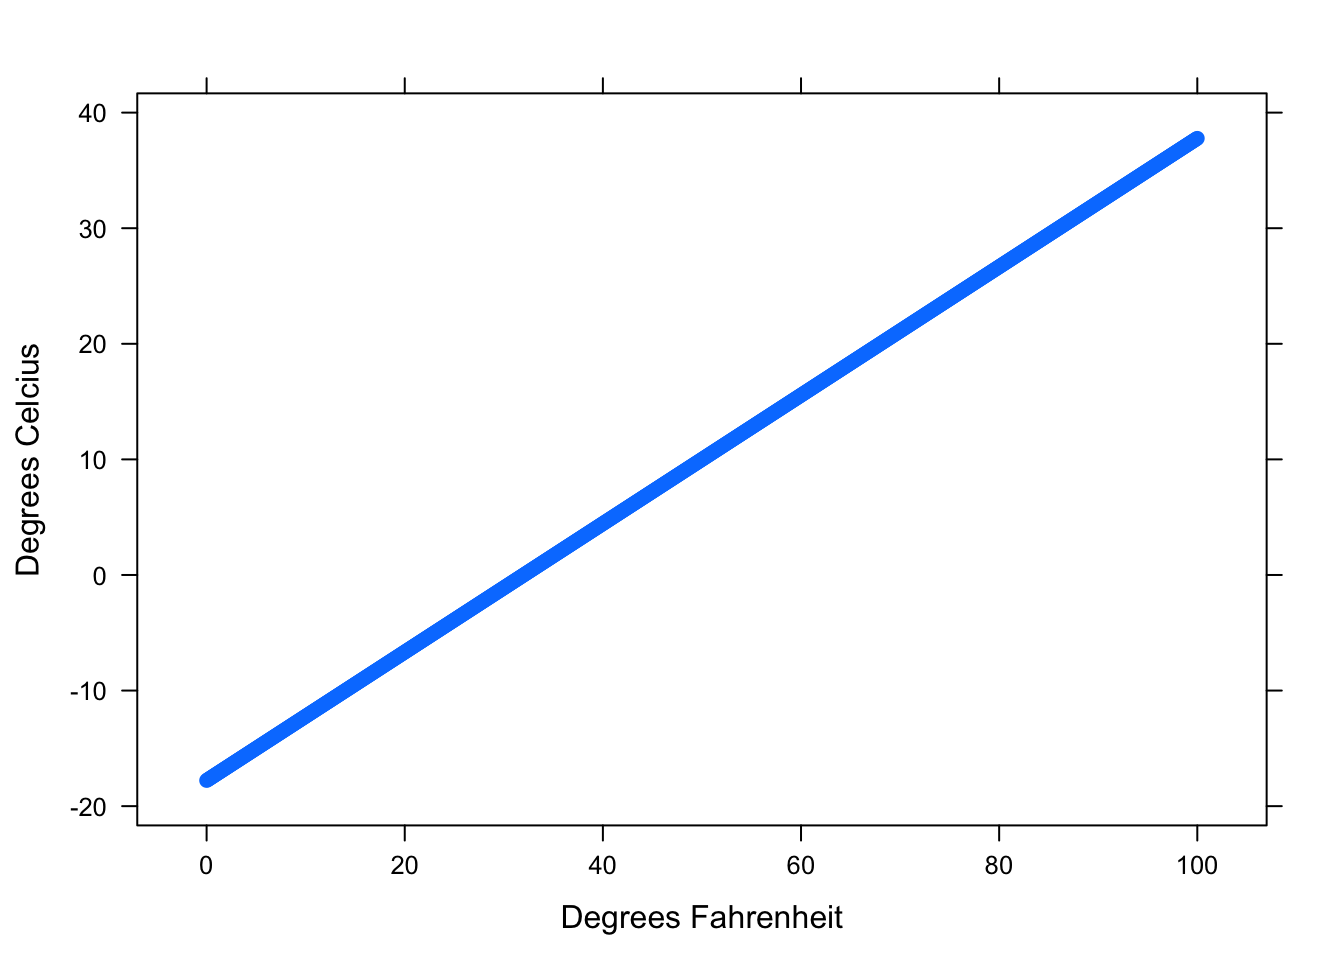 Deterministic Relationship.  This graph shows the relationship between Fahrenheit and Celcius.